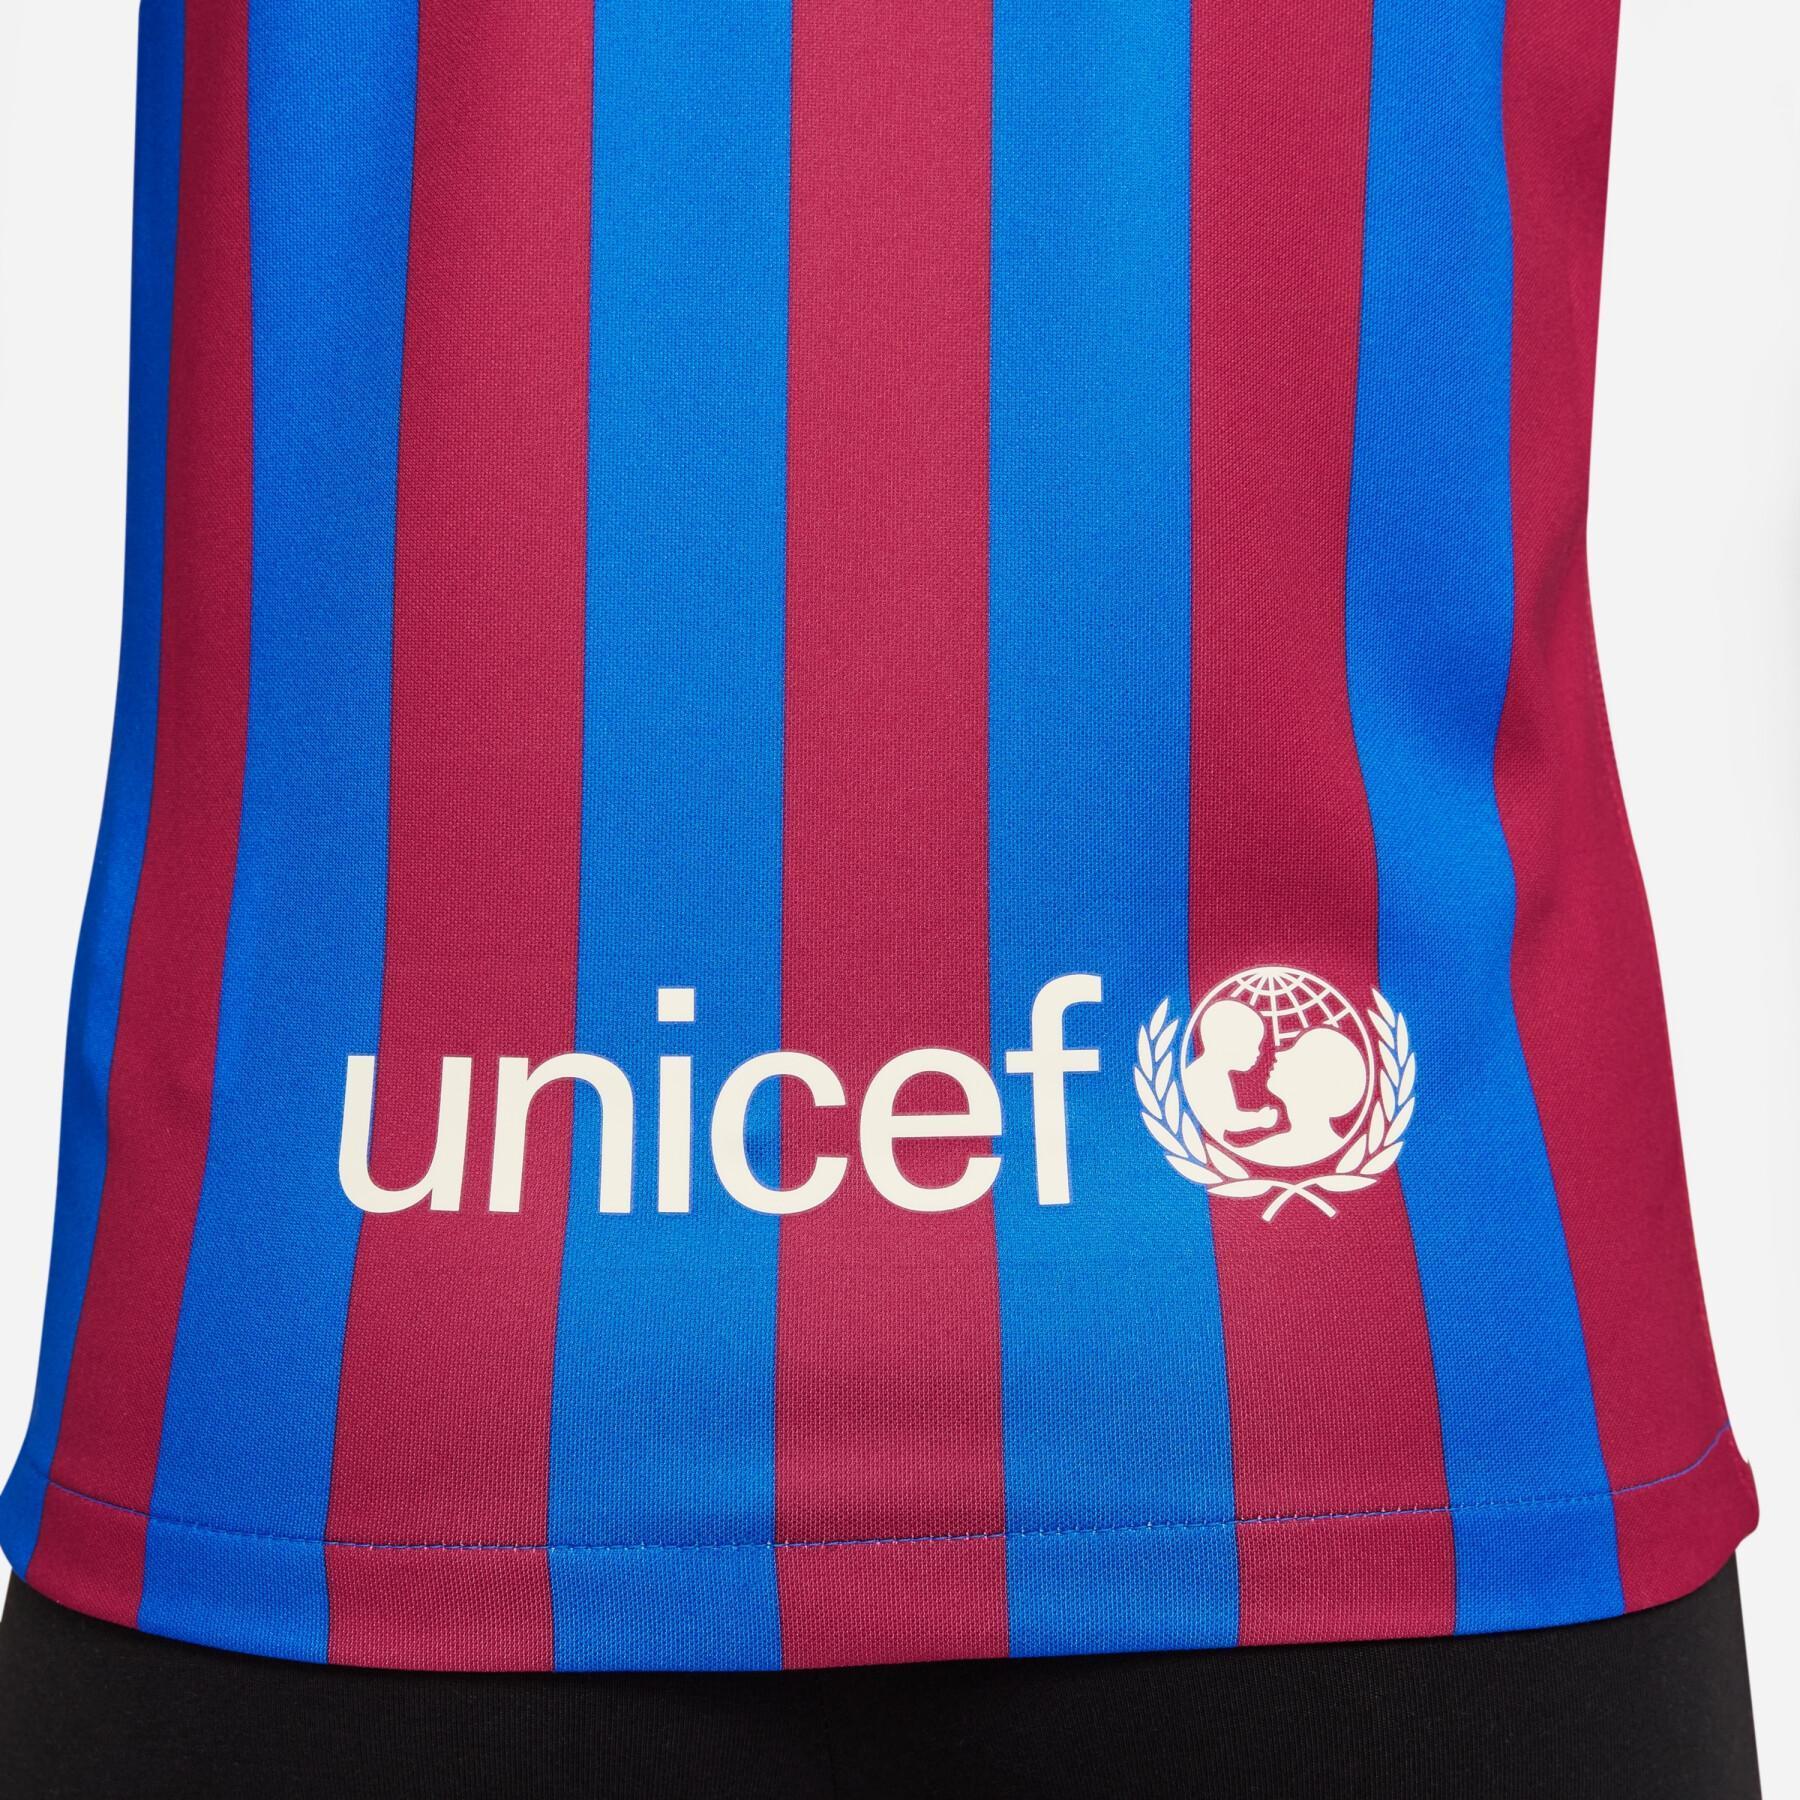 Home jersey child FC Barcelone 2021/22